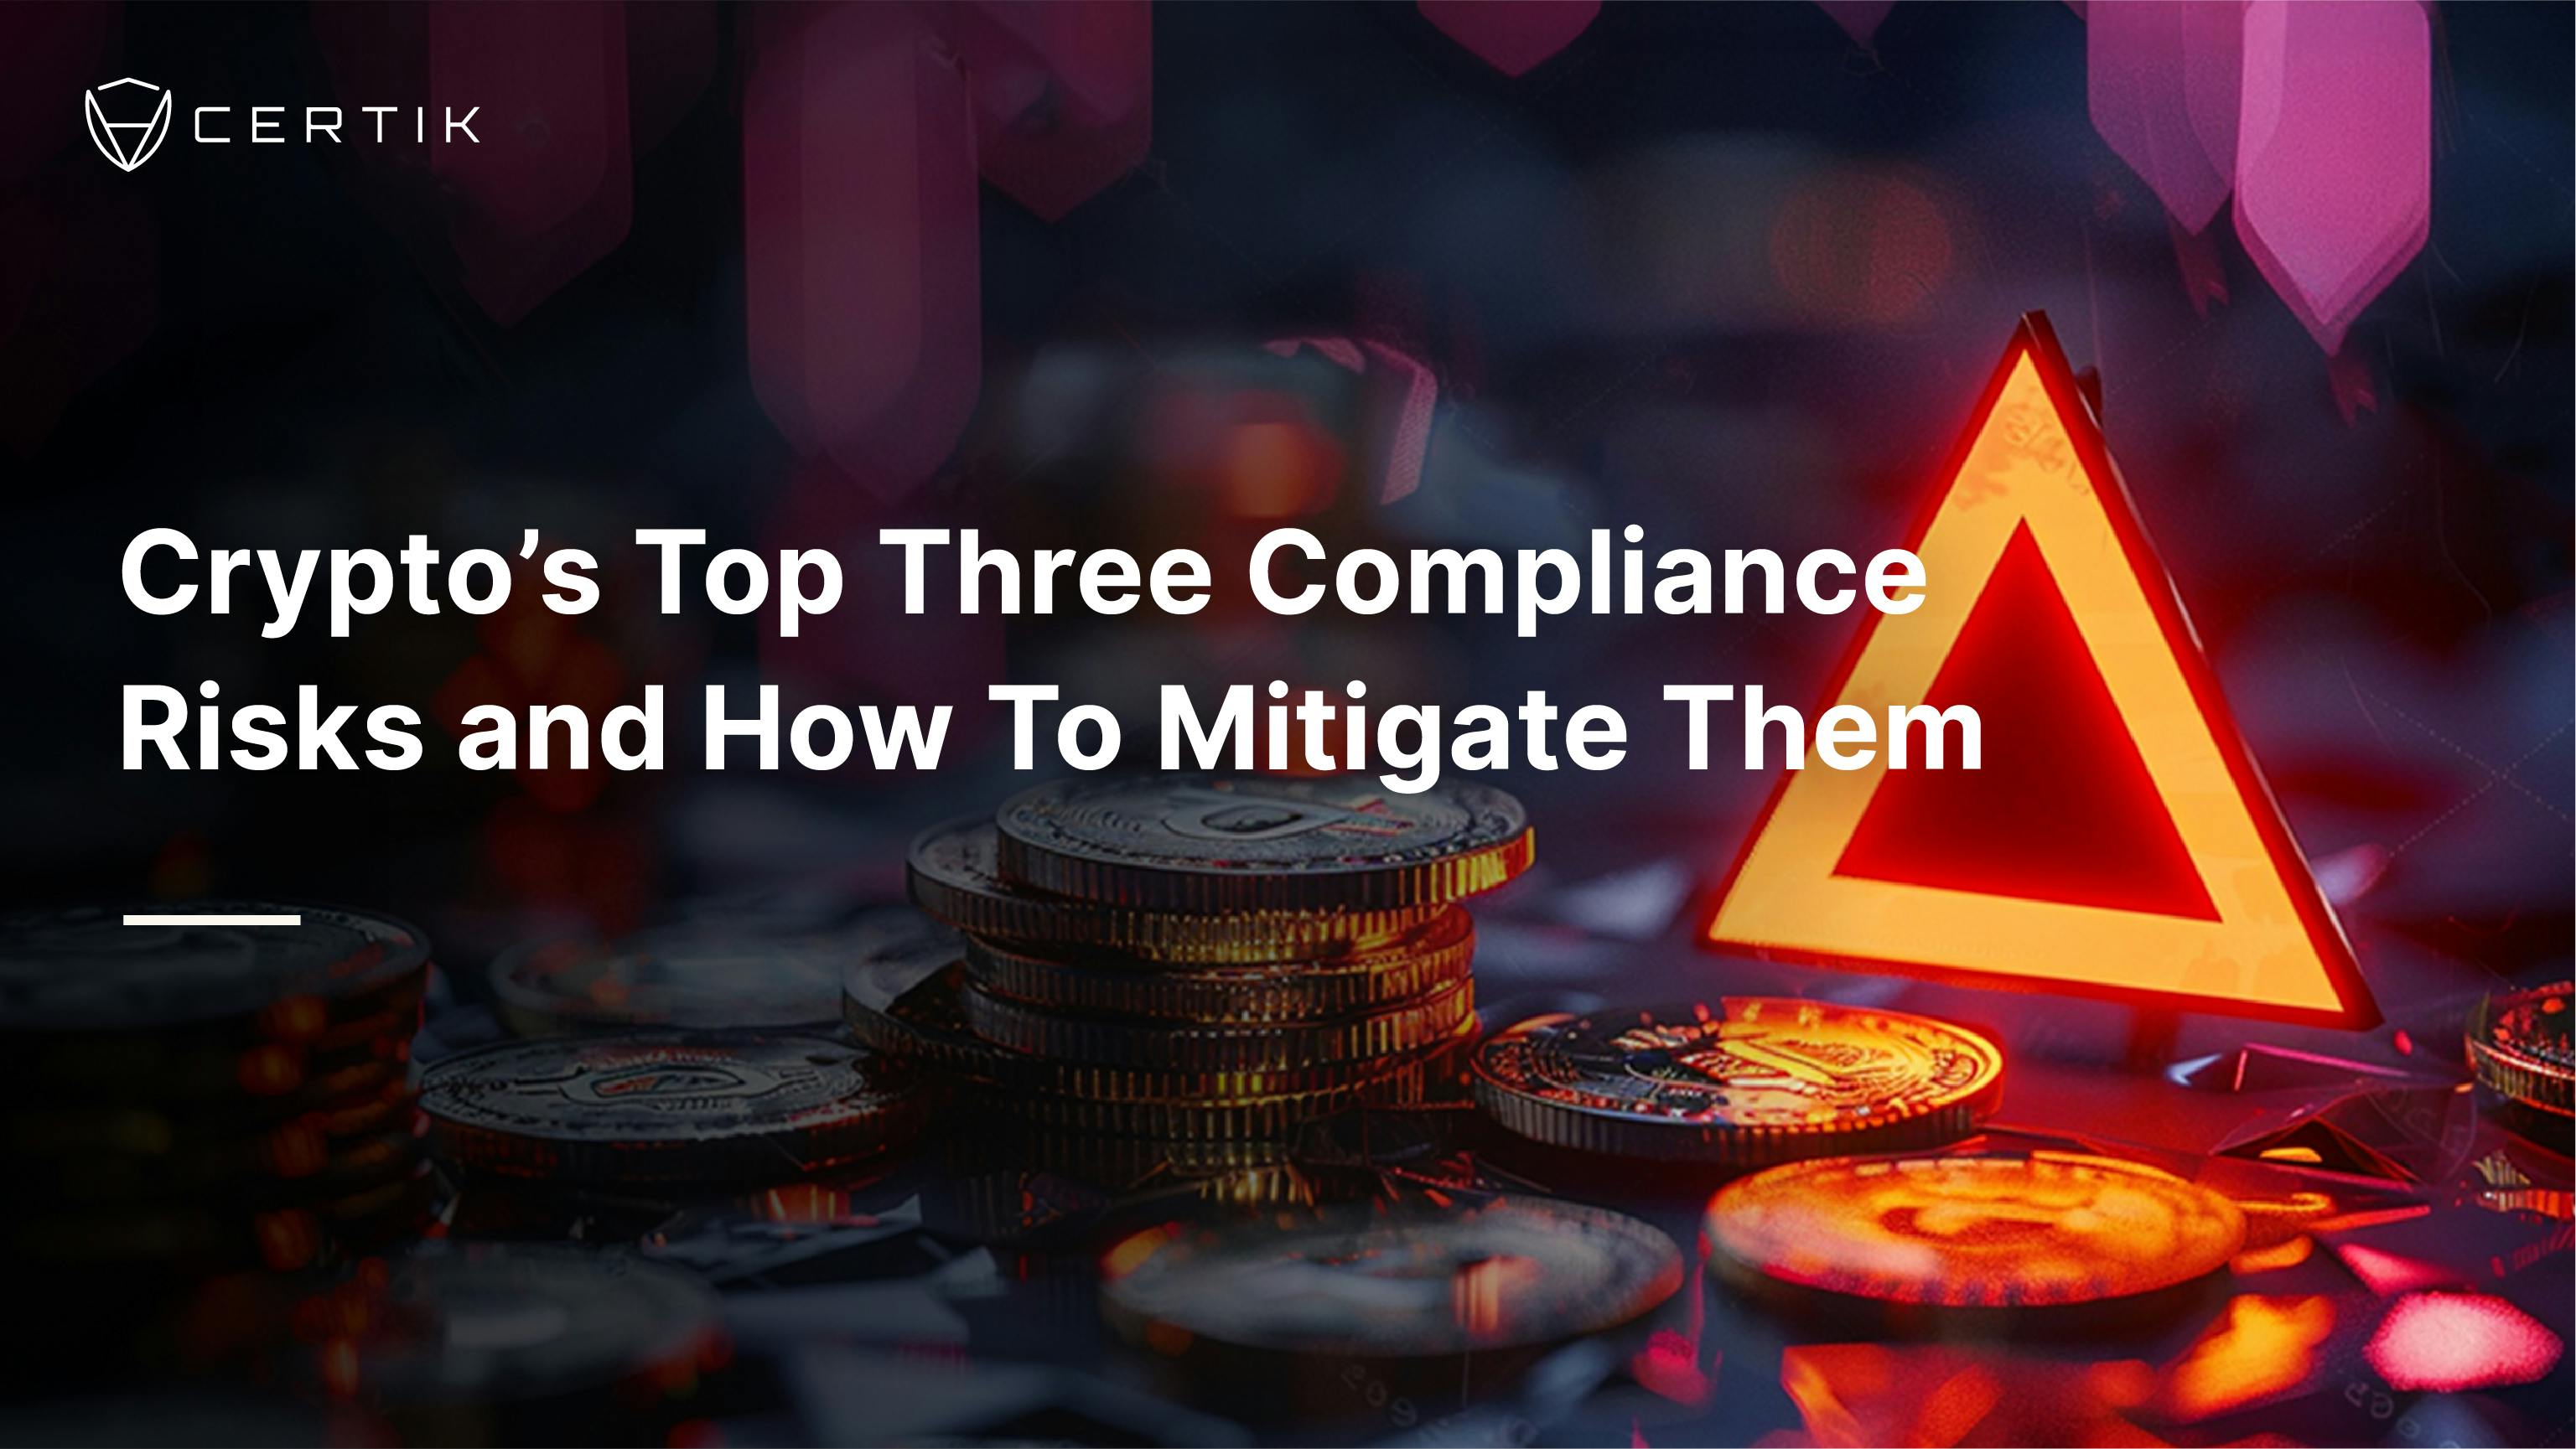 Crypto’s Top Three Compliance Risks and How To Mitigate Them